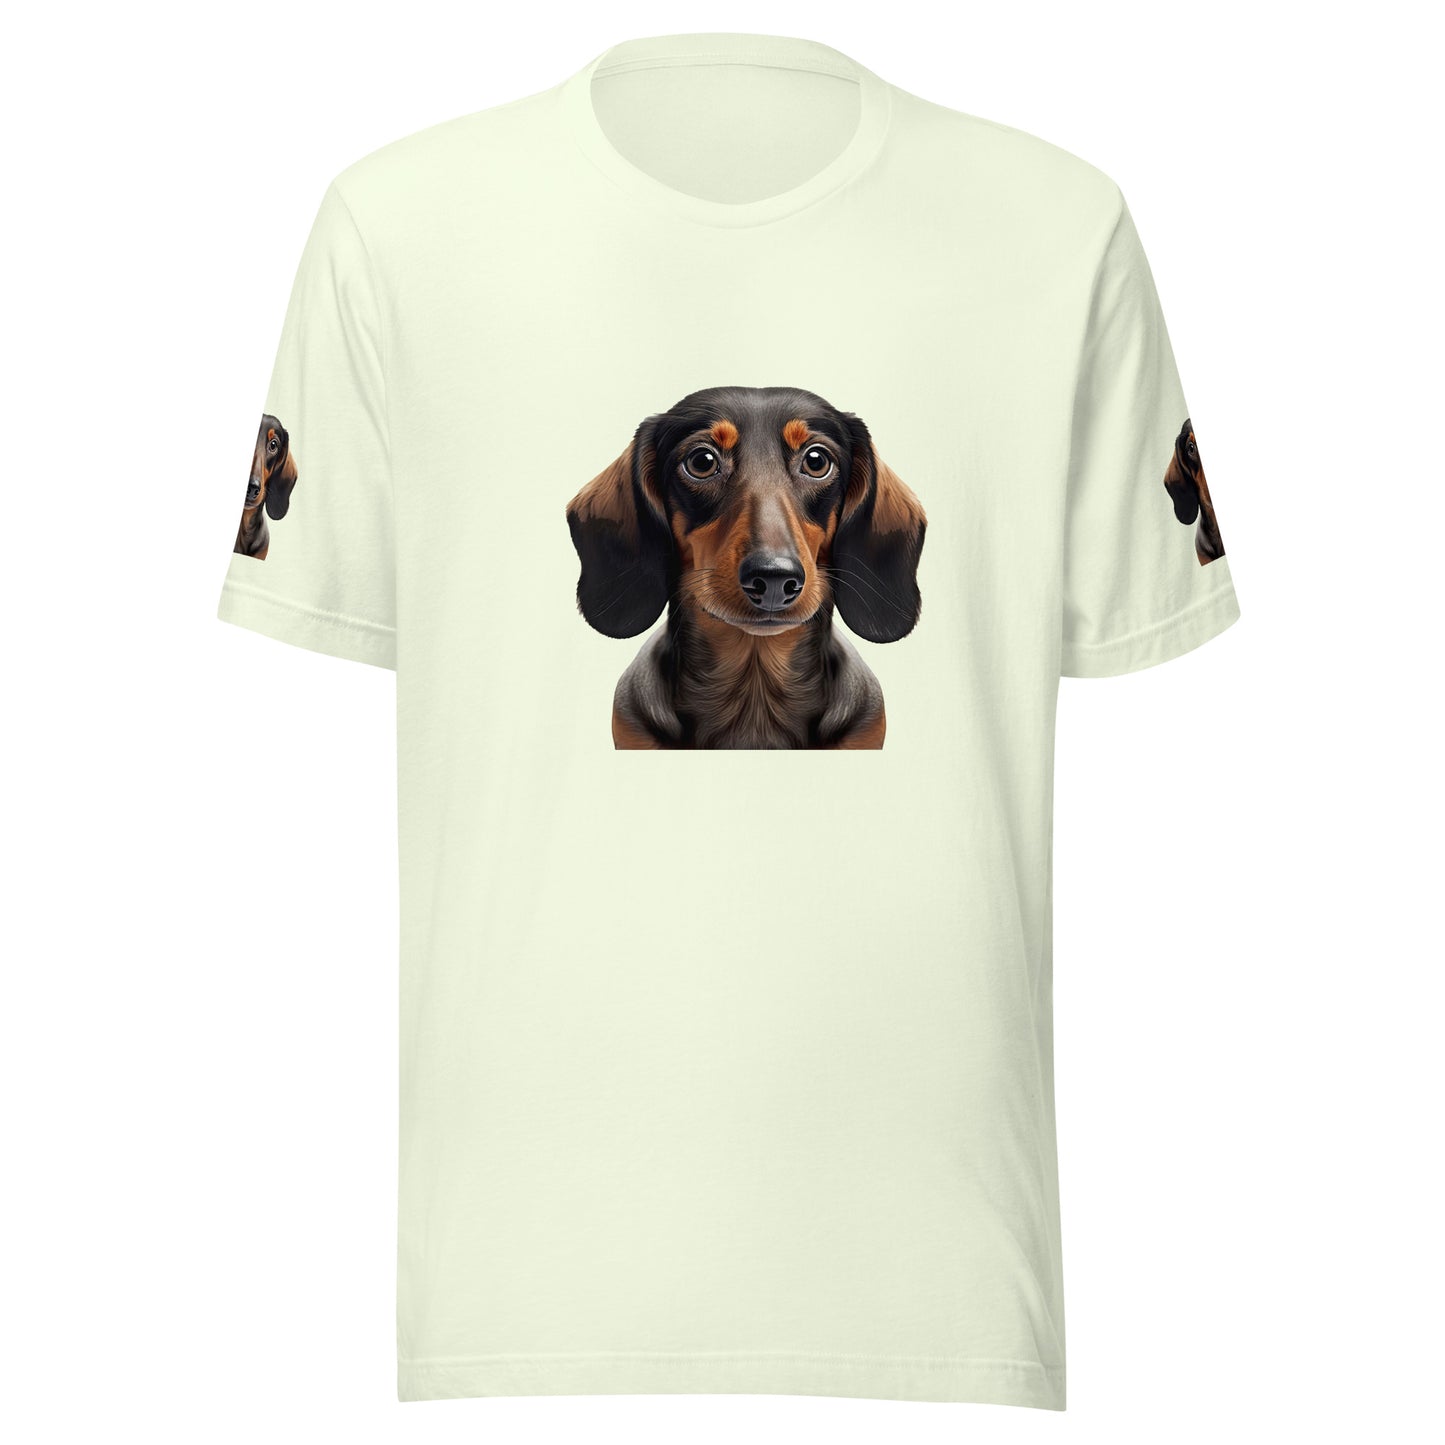 Women and Men's (Unisex) T-shirt printed with a portrait of a Dachshund